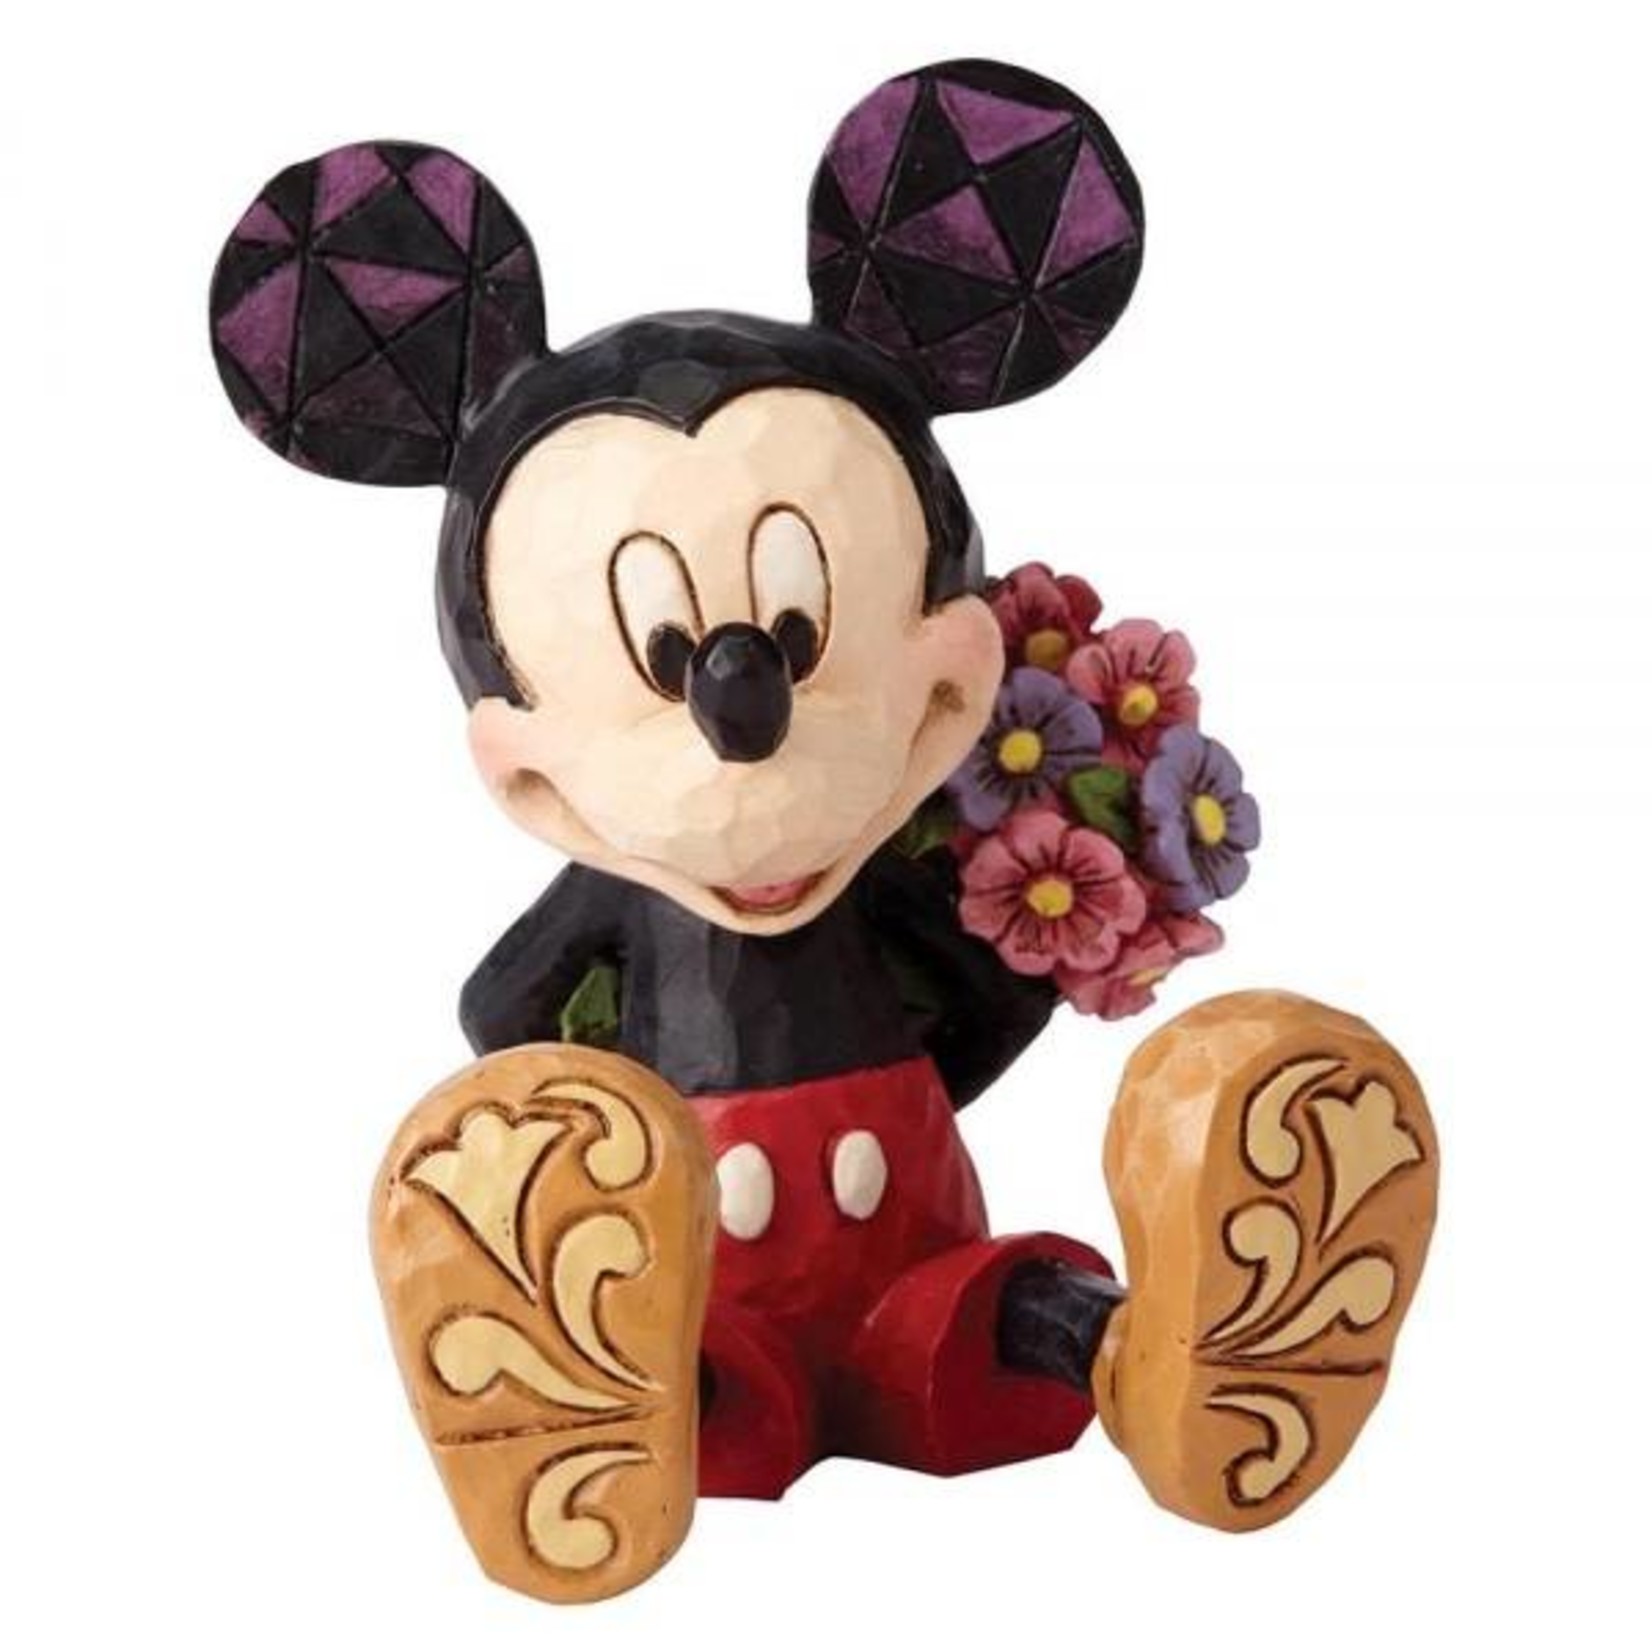 Disney Traditions Disney - Mickey Mouse with Flowers